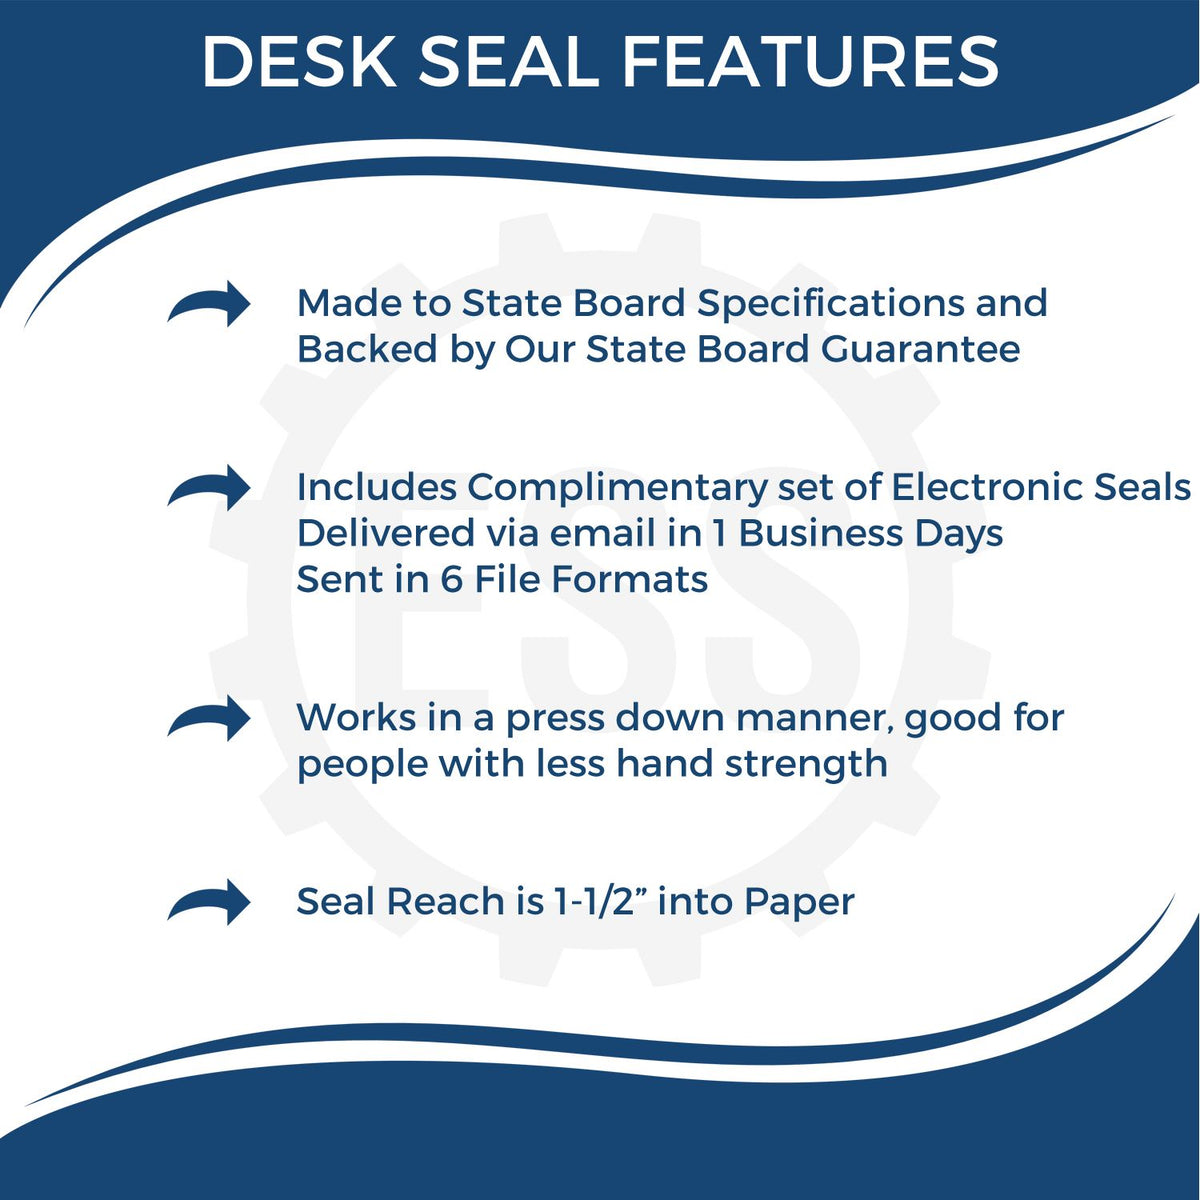 A picture of an infographic highlighting the selling points for the Illinois Desk Architect Embossing Seal